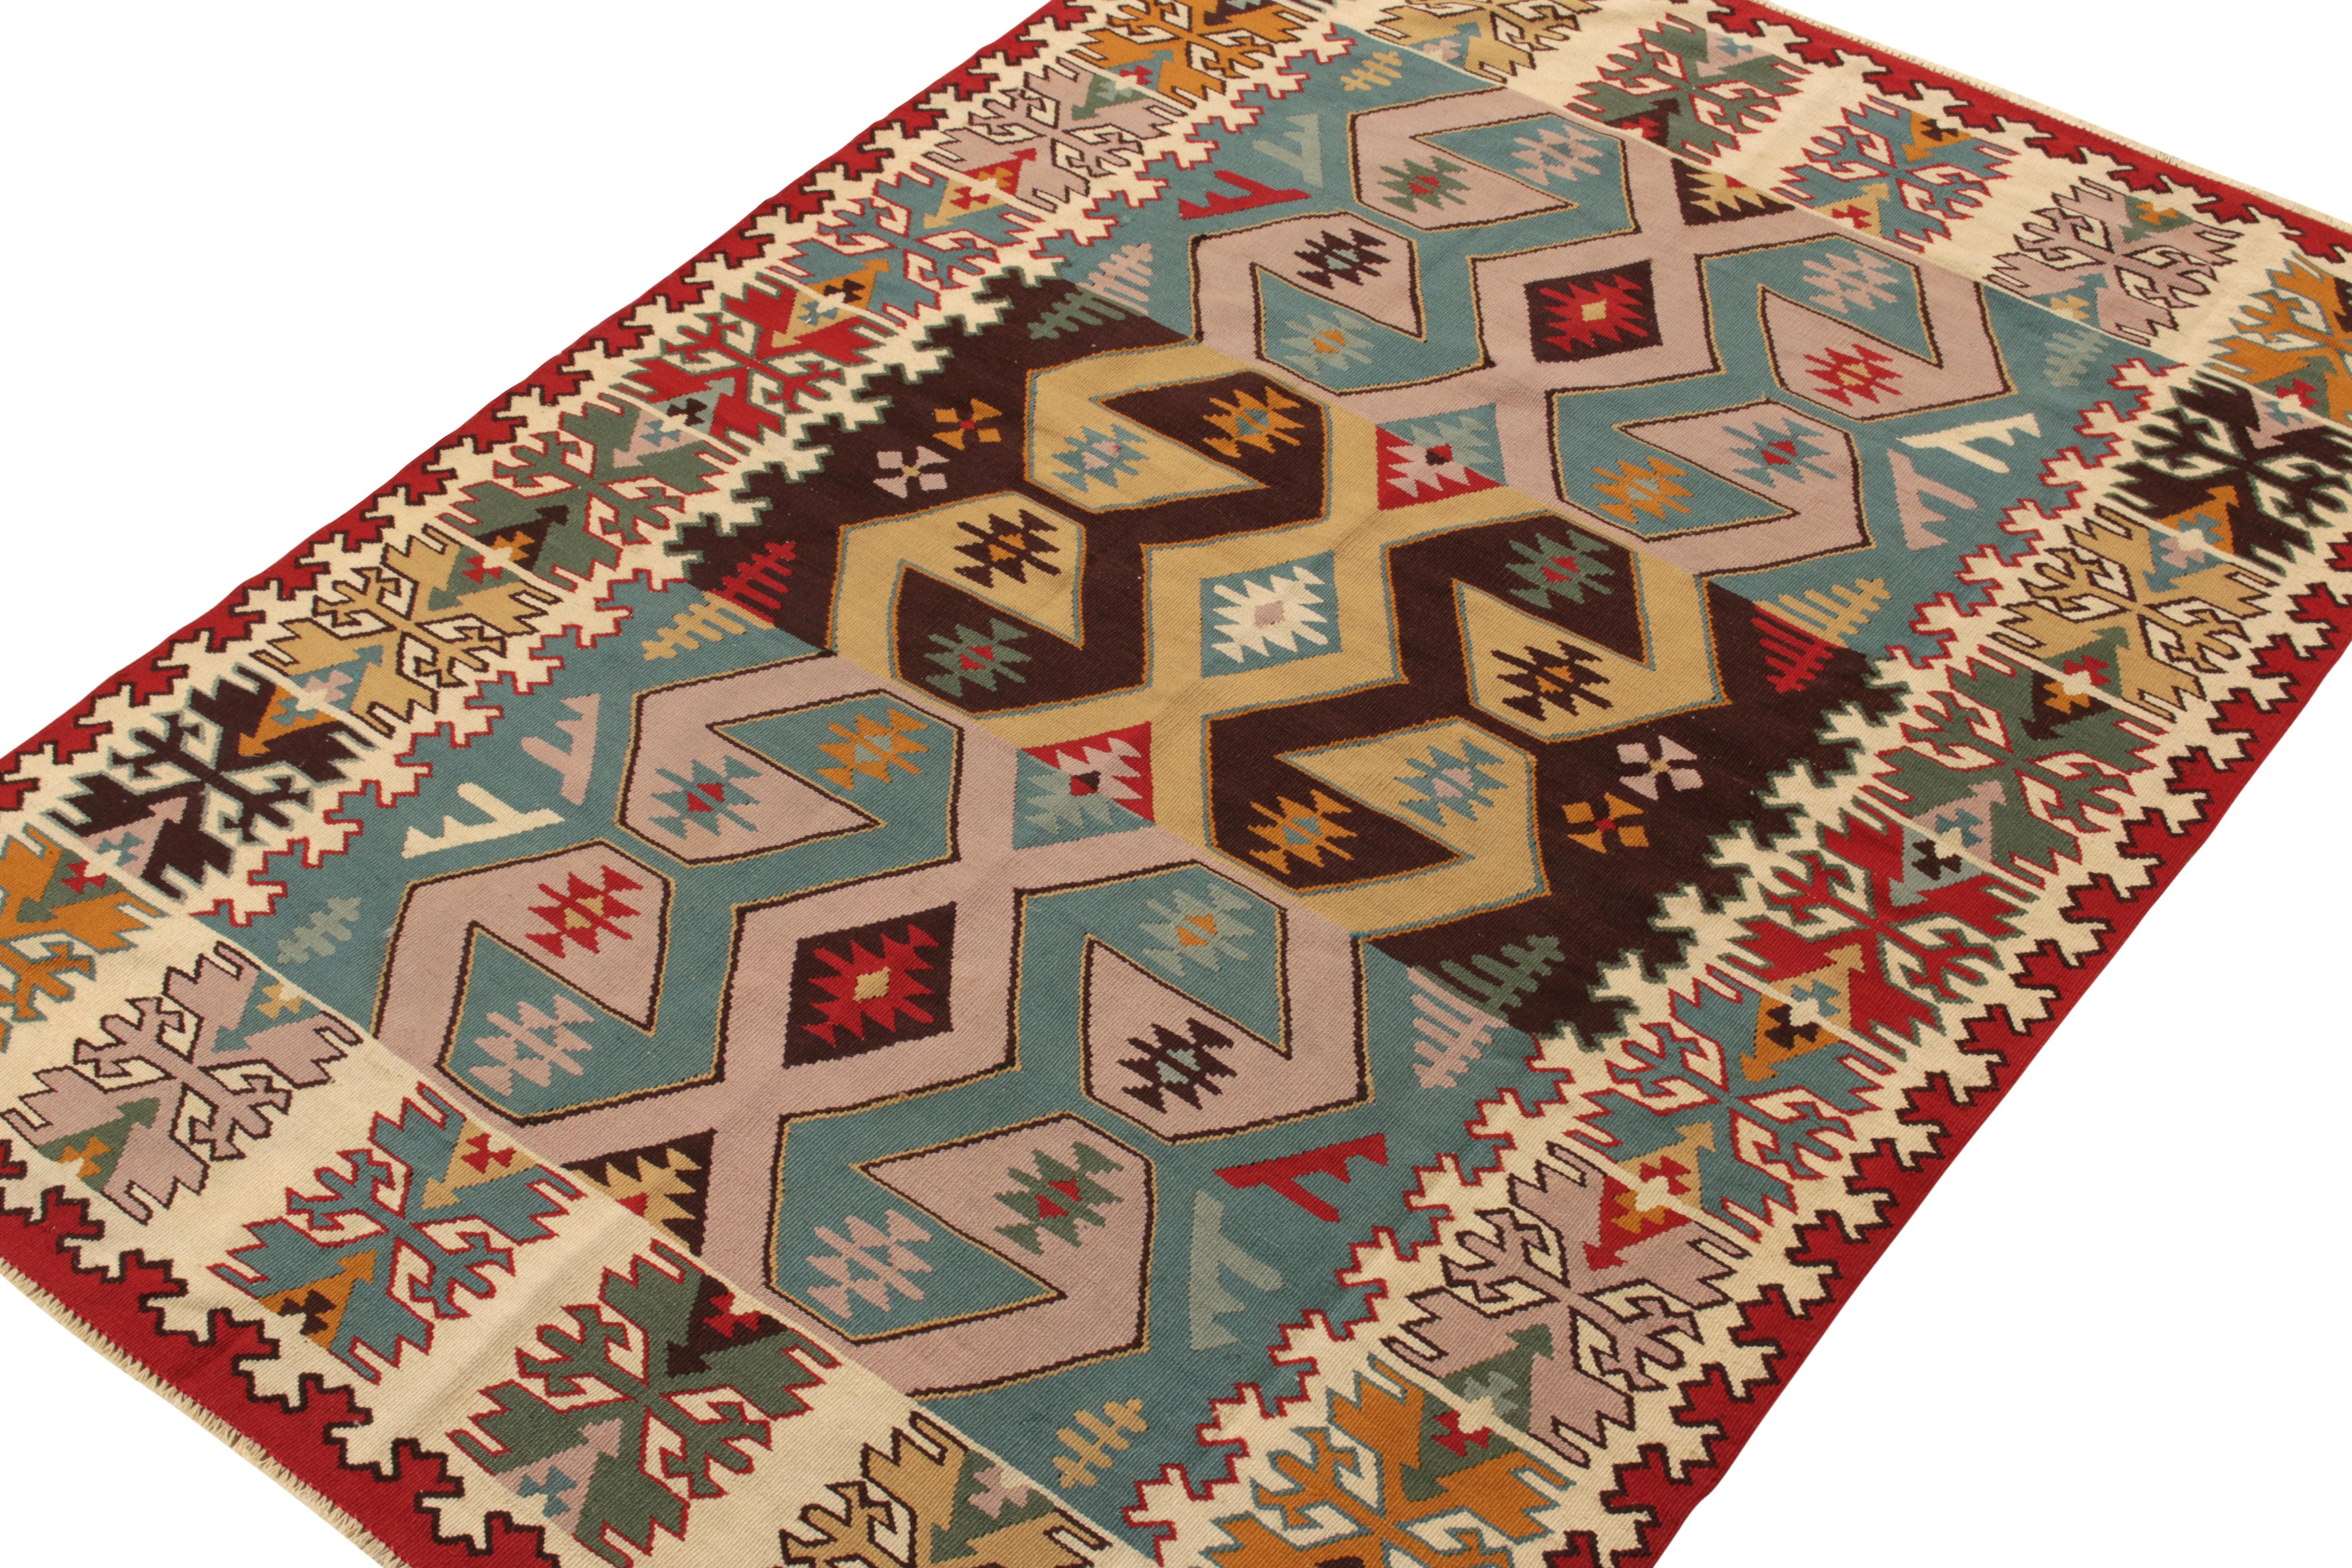 Hand-Knotted Vintage Turkish Kilim Rug in Multicolor, Tribal Geometric Pattern by Rug & Kilim For Sale